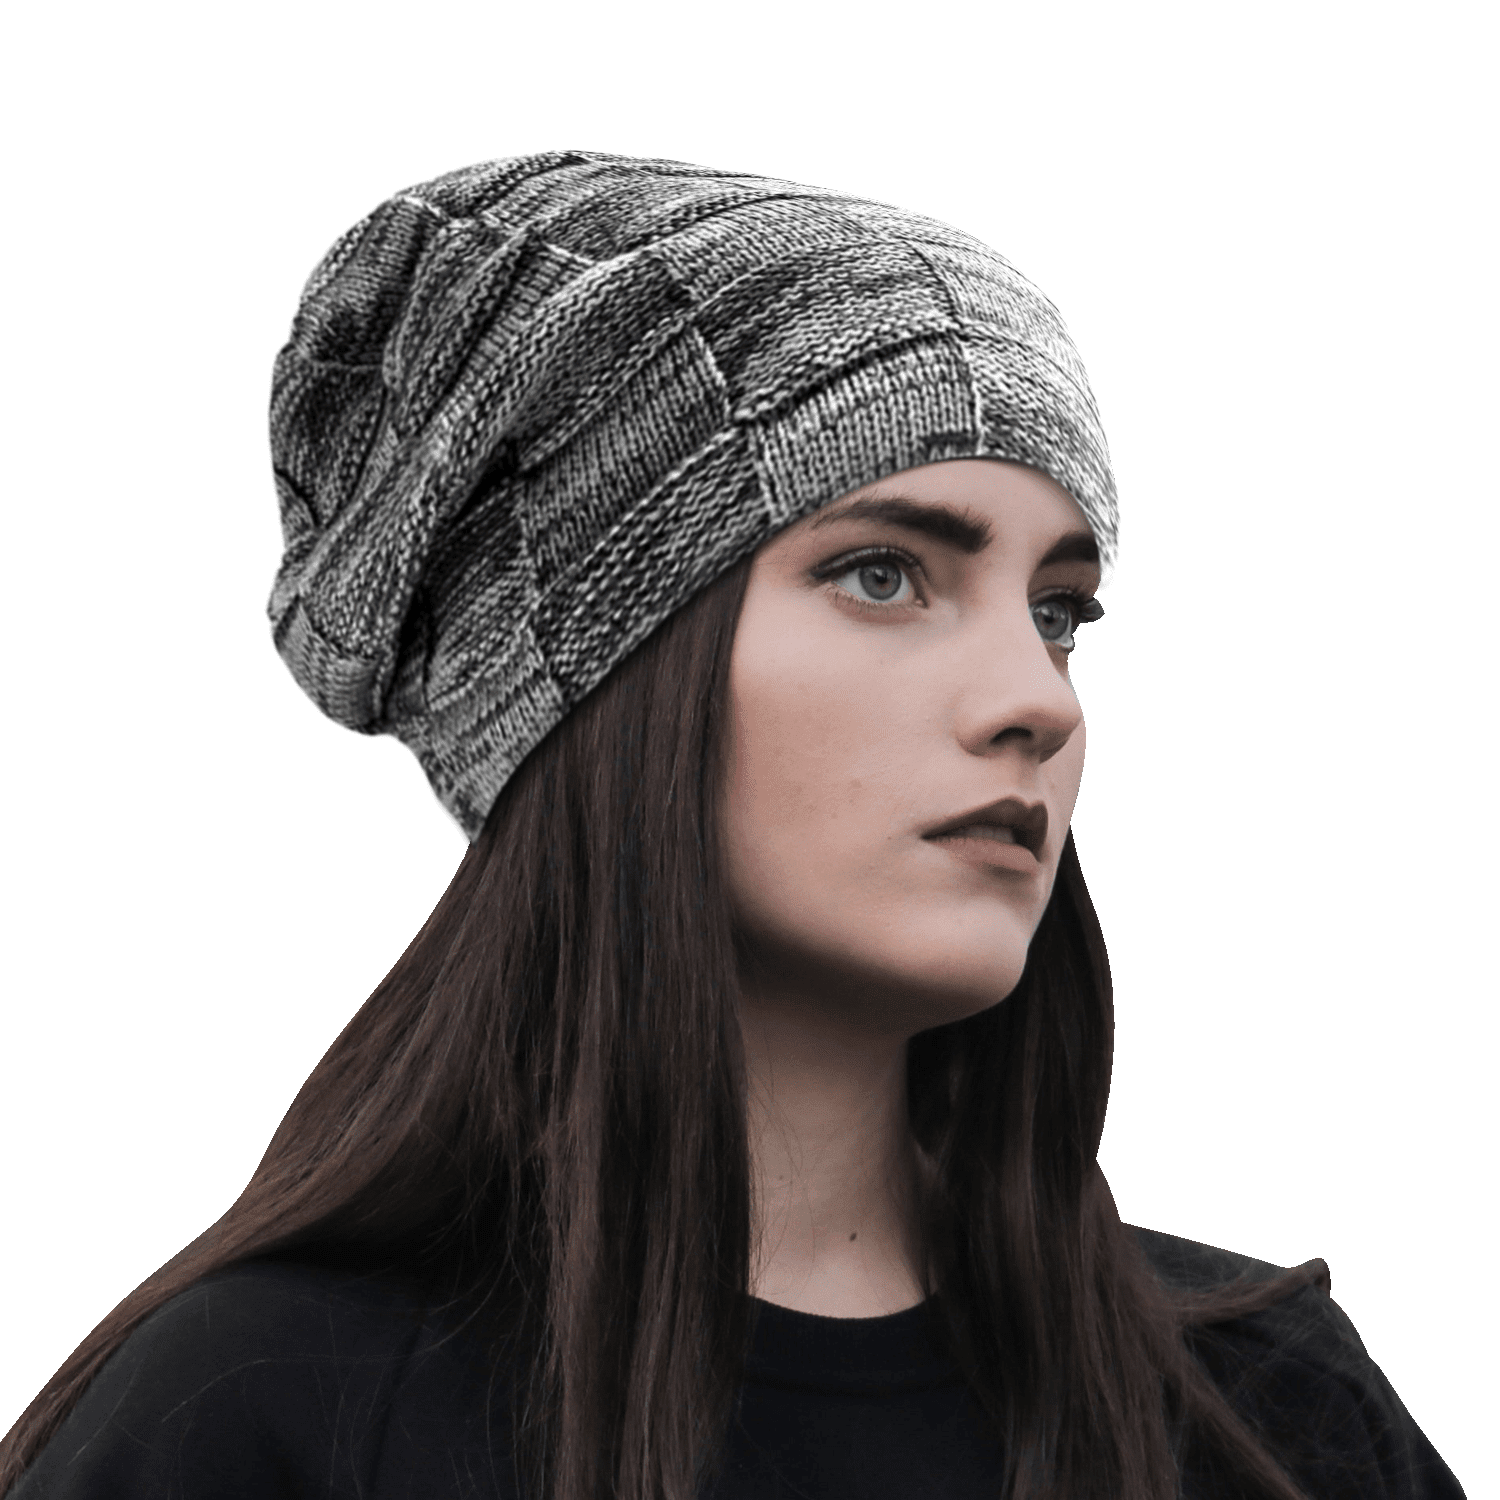 Ozy Winter Beanie Hat for Men and Women, Slouchy Warm Fleece Lined Knit  Caps, One Size,Soft Material Inside, Dark Gray